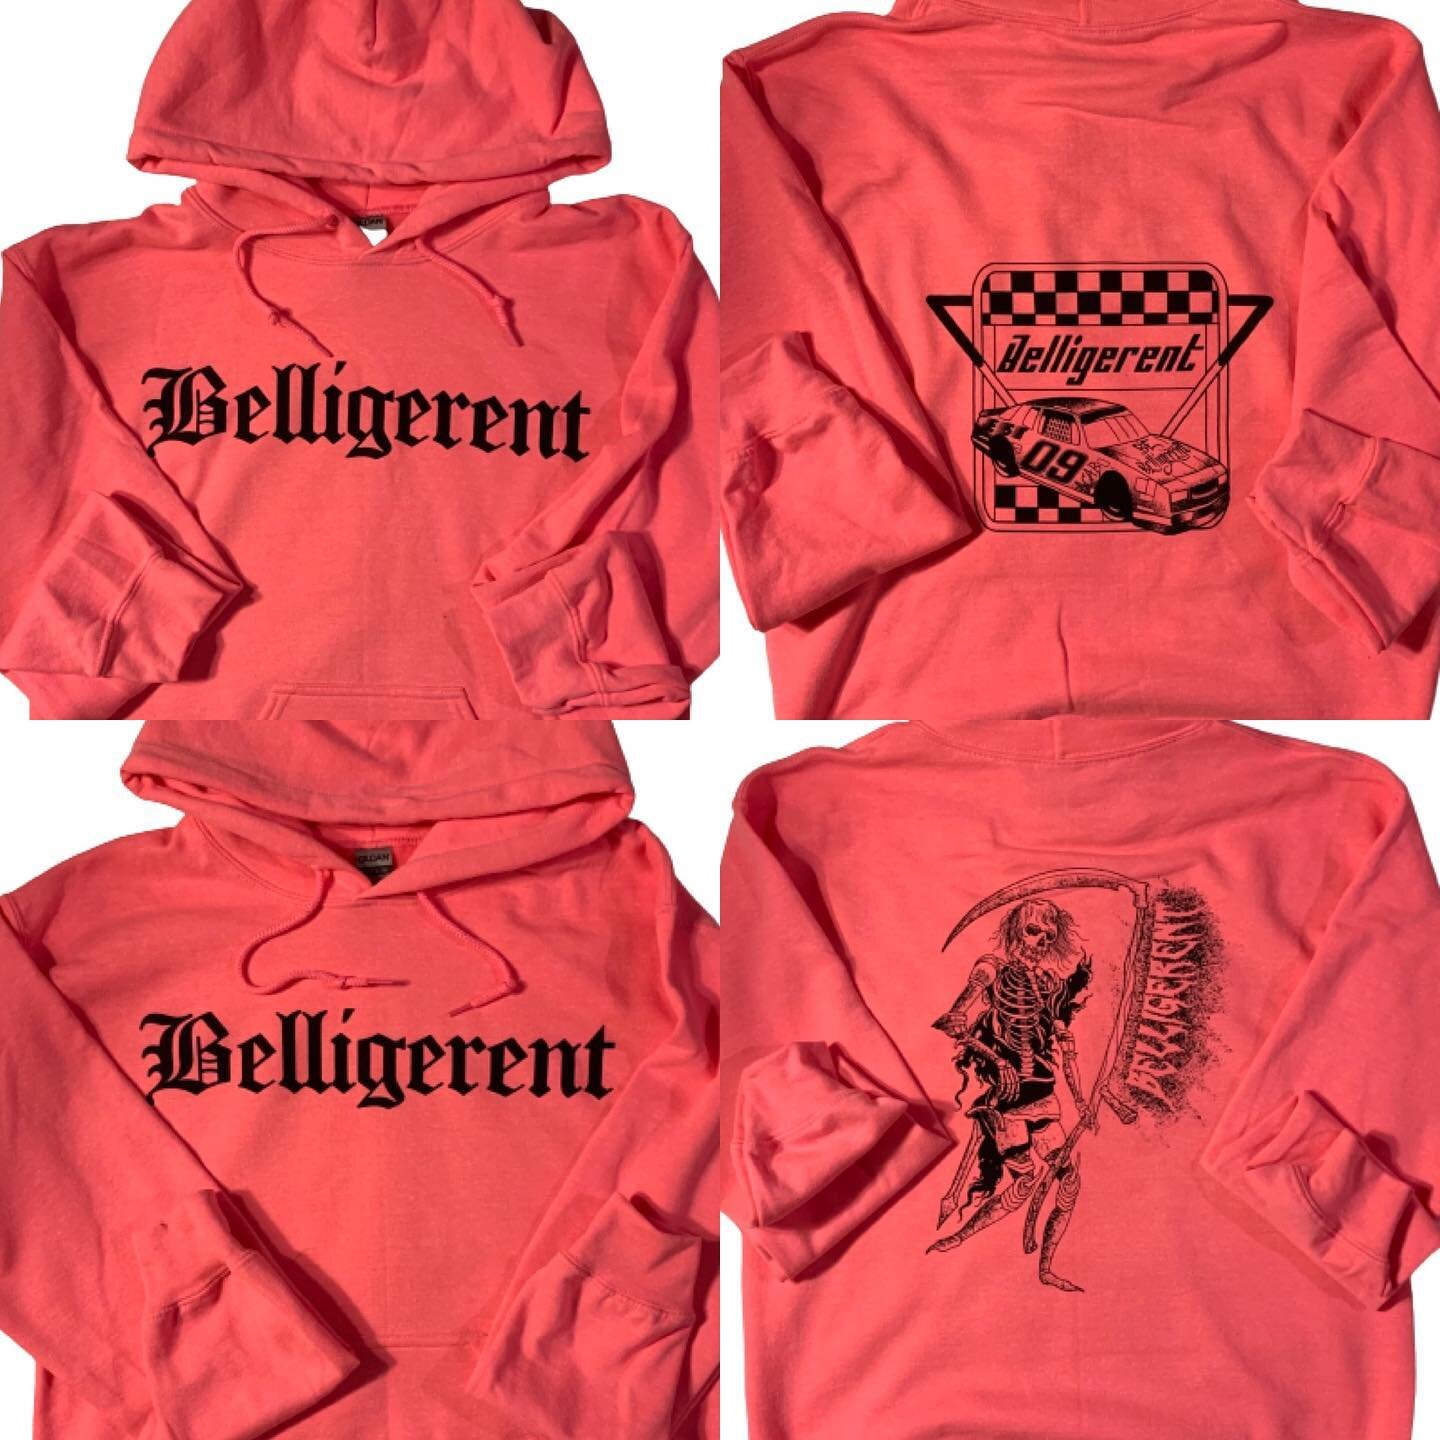 Our latest drop is now available on hoodies ~ these hoodies are extremely limited &amp; run in sizes S-XL . Only available in exclusive safety pink 💕 They are available to purchase now online at getbelligerent.com ~ Click the link in our bio or DM u